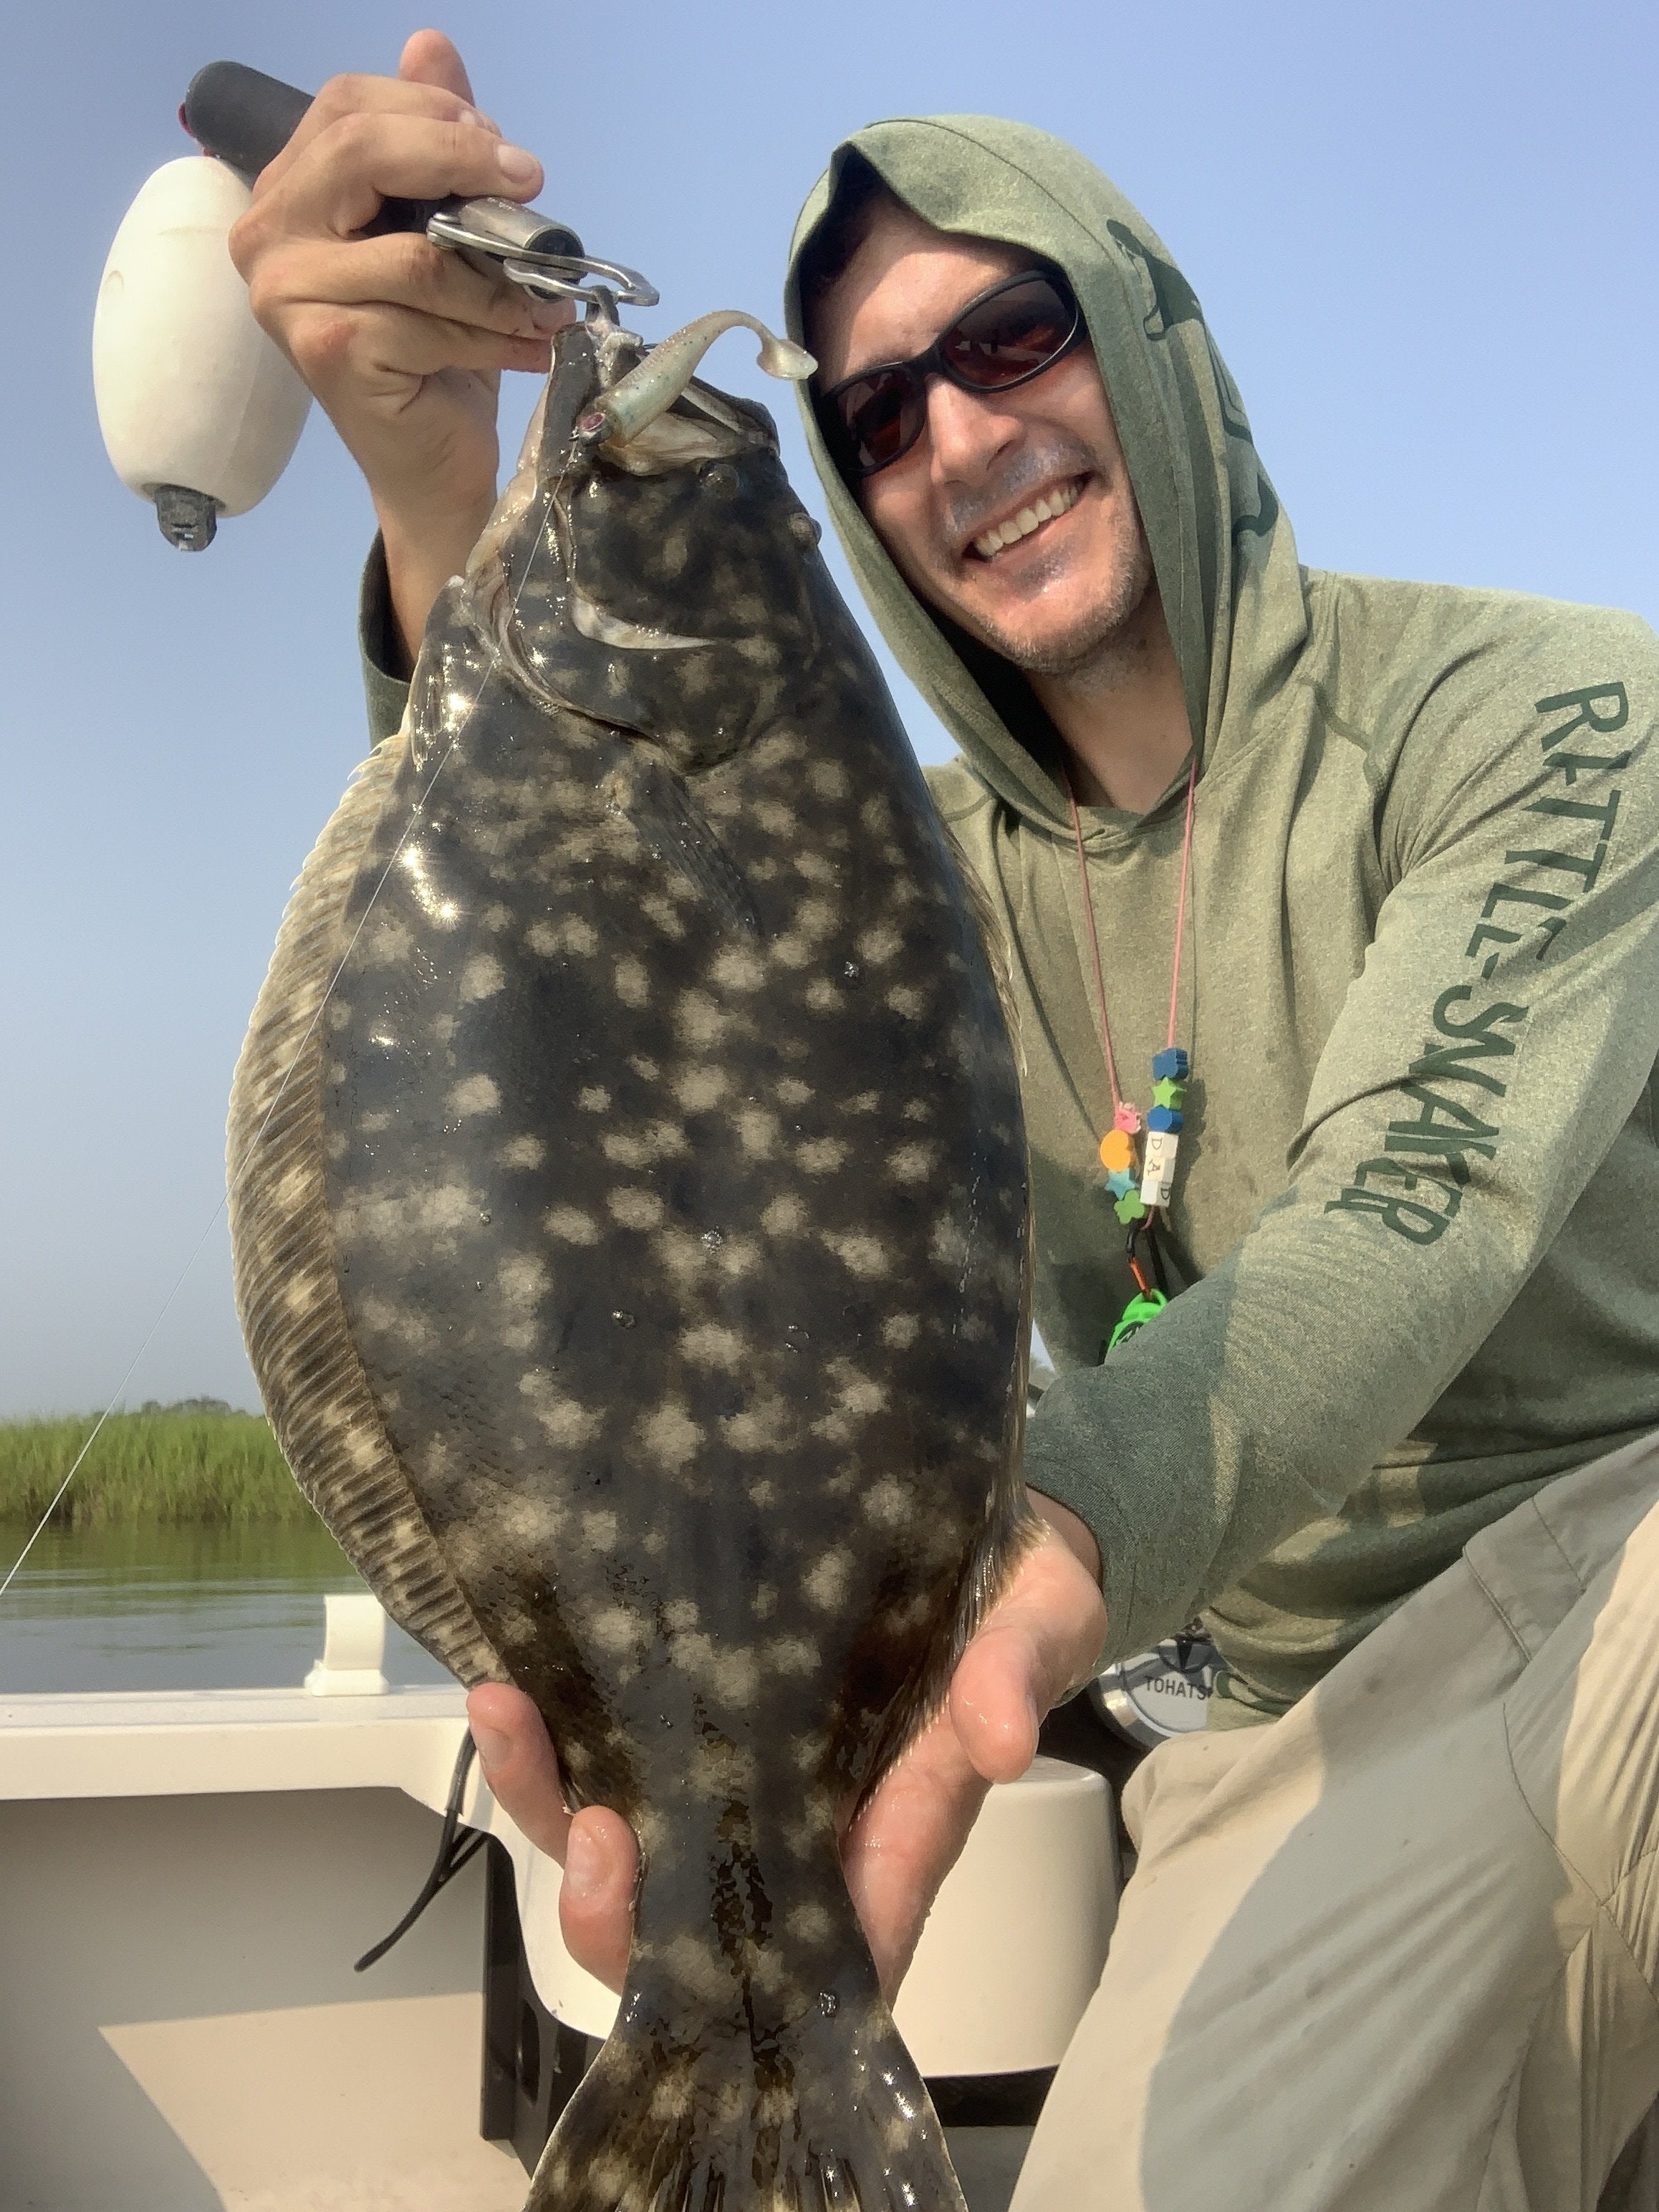 Flounder fishing - novice question on lures